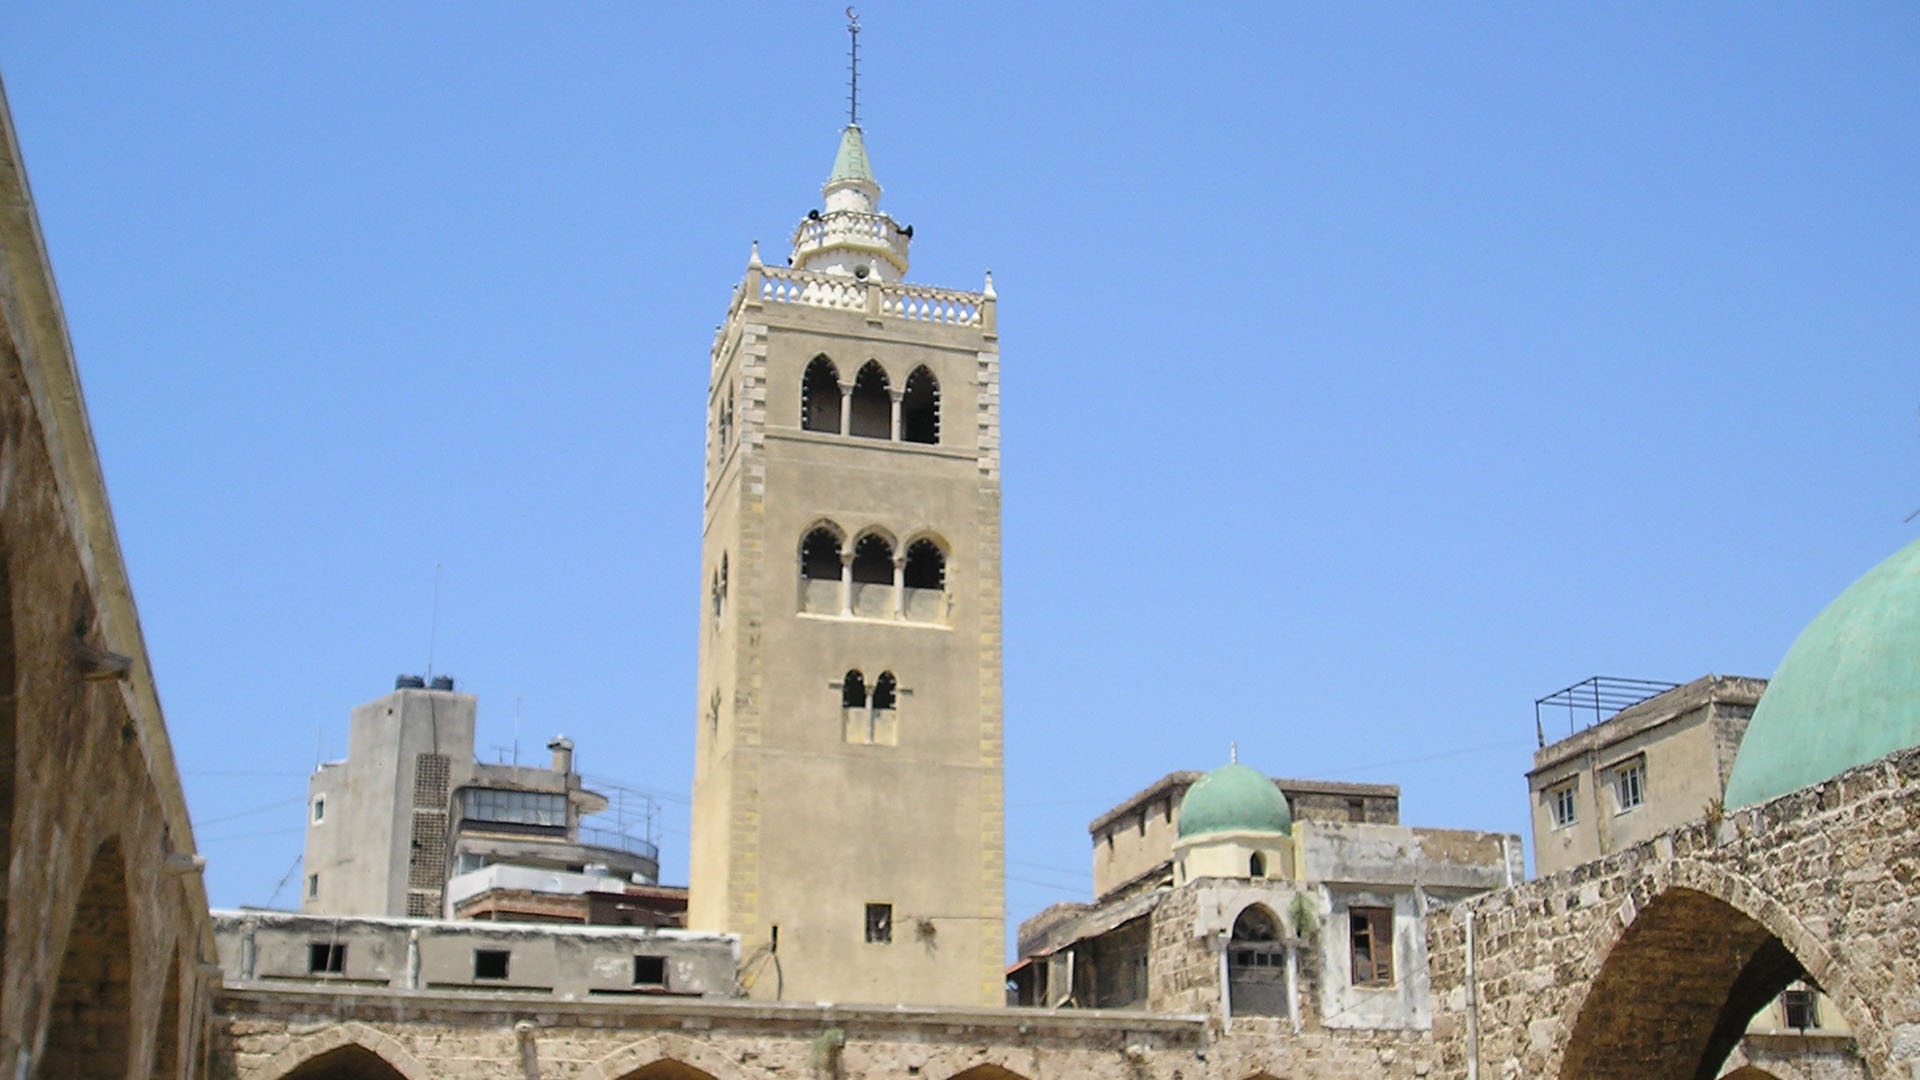 A photograph highlights the majestic minaret of the Great Mosque in Tripoli, serving as a testament to its stature as one of Lebanon's largest mosques.